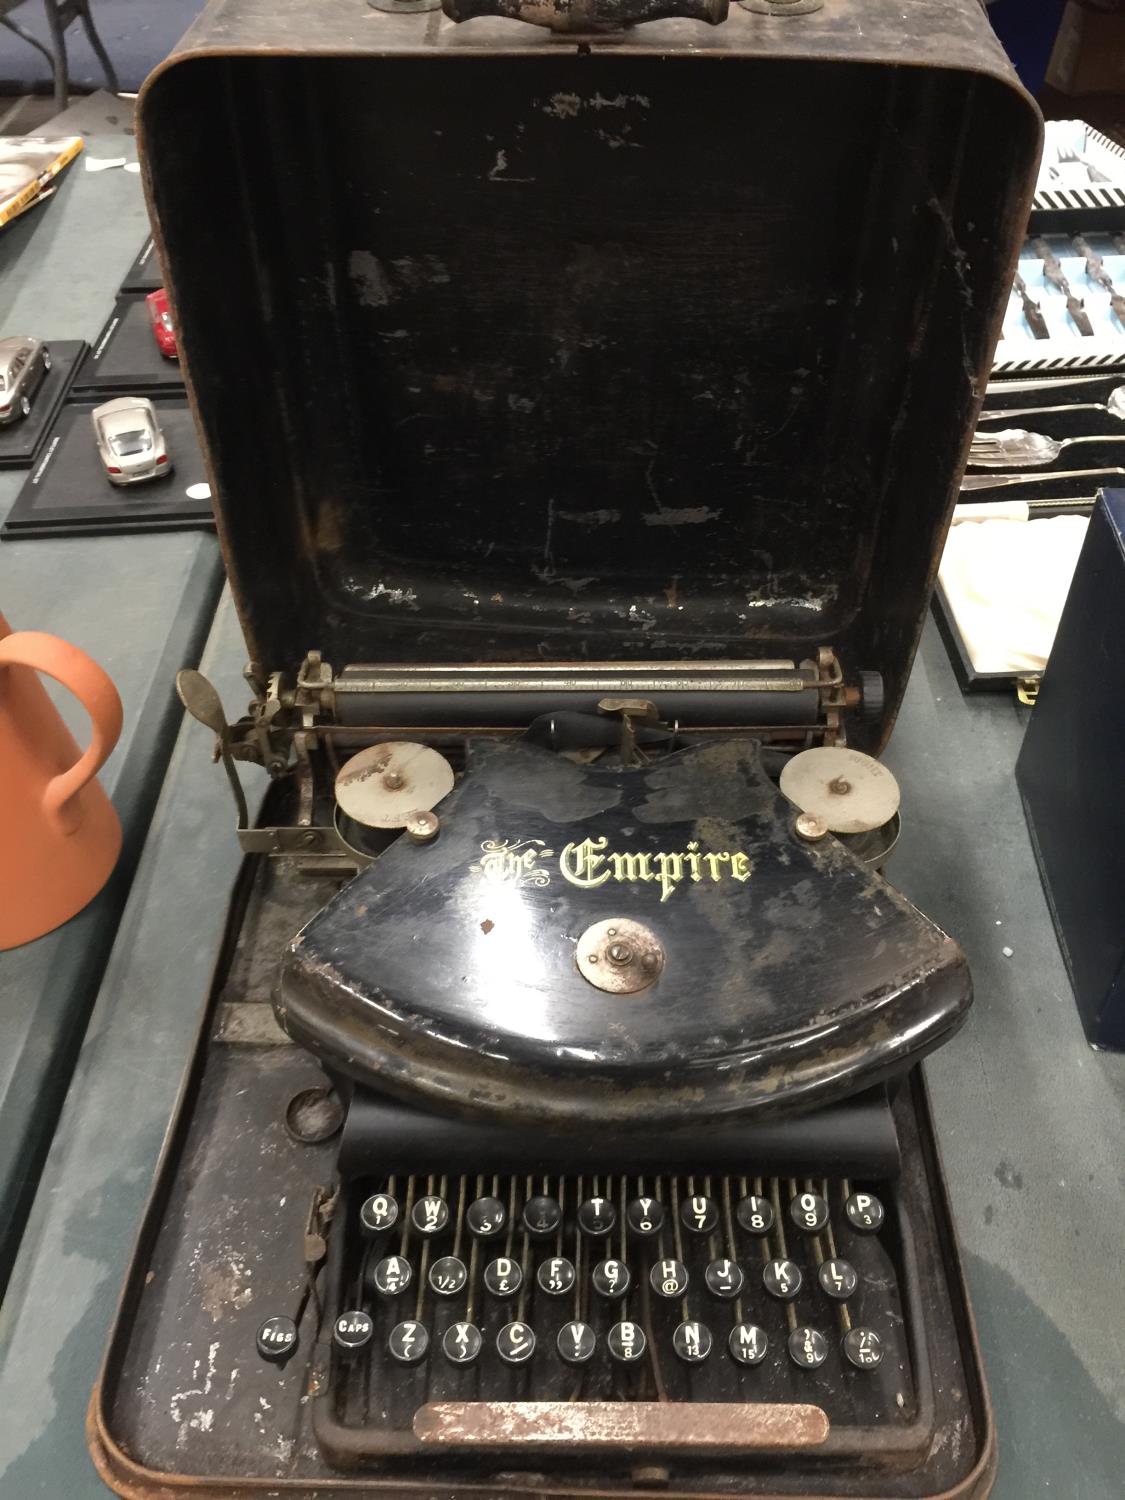 A VINTAGE 'THE EMPIRE' TYPEWRITER IN METAL CASE